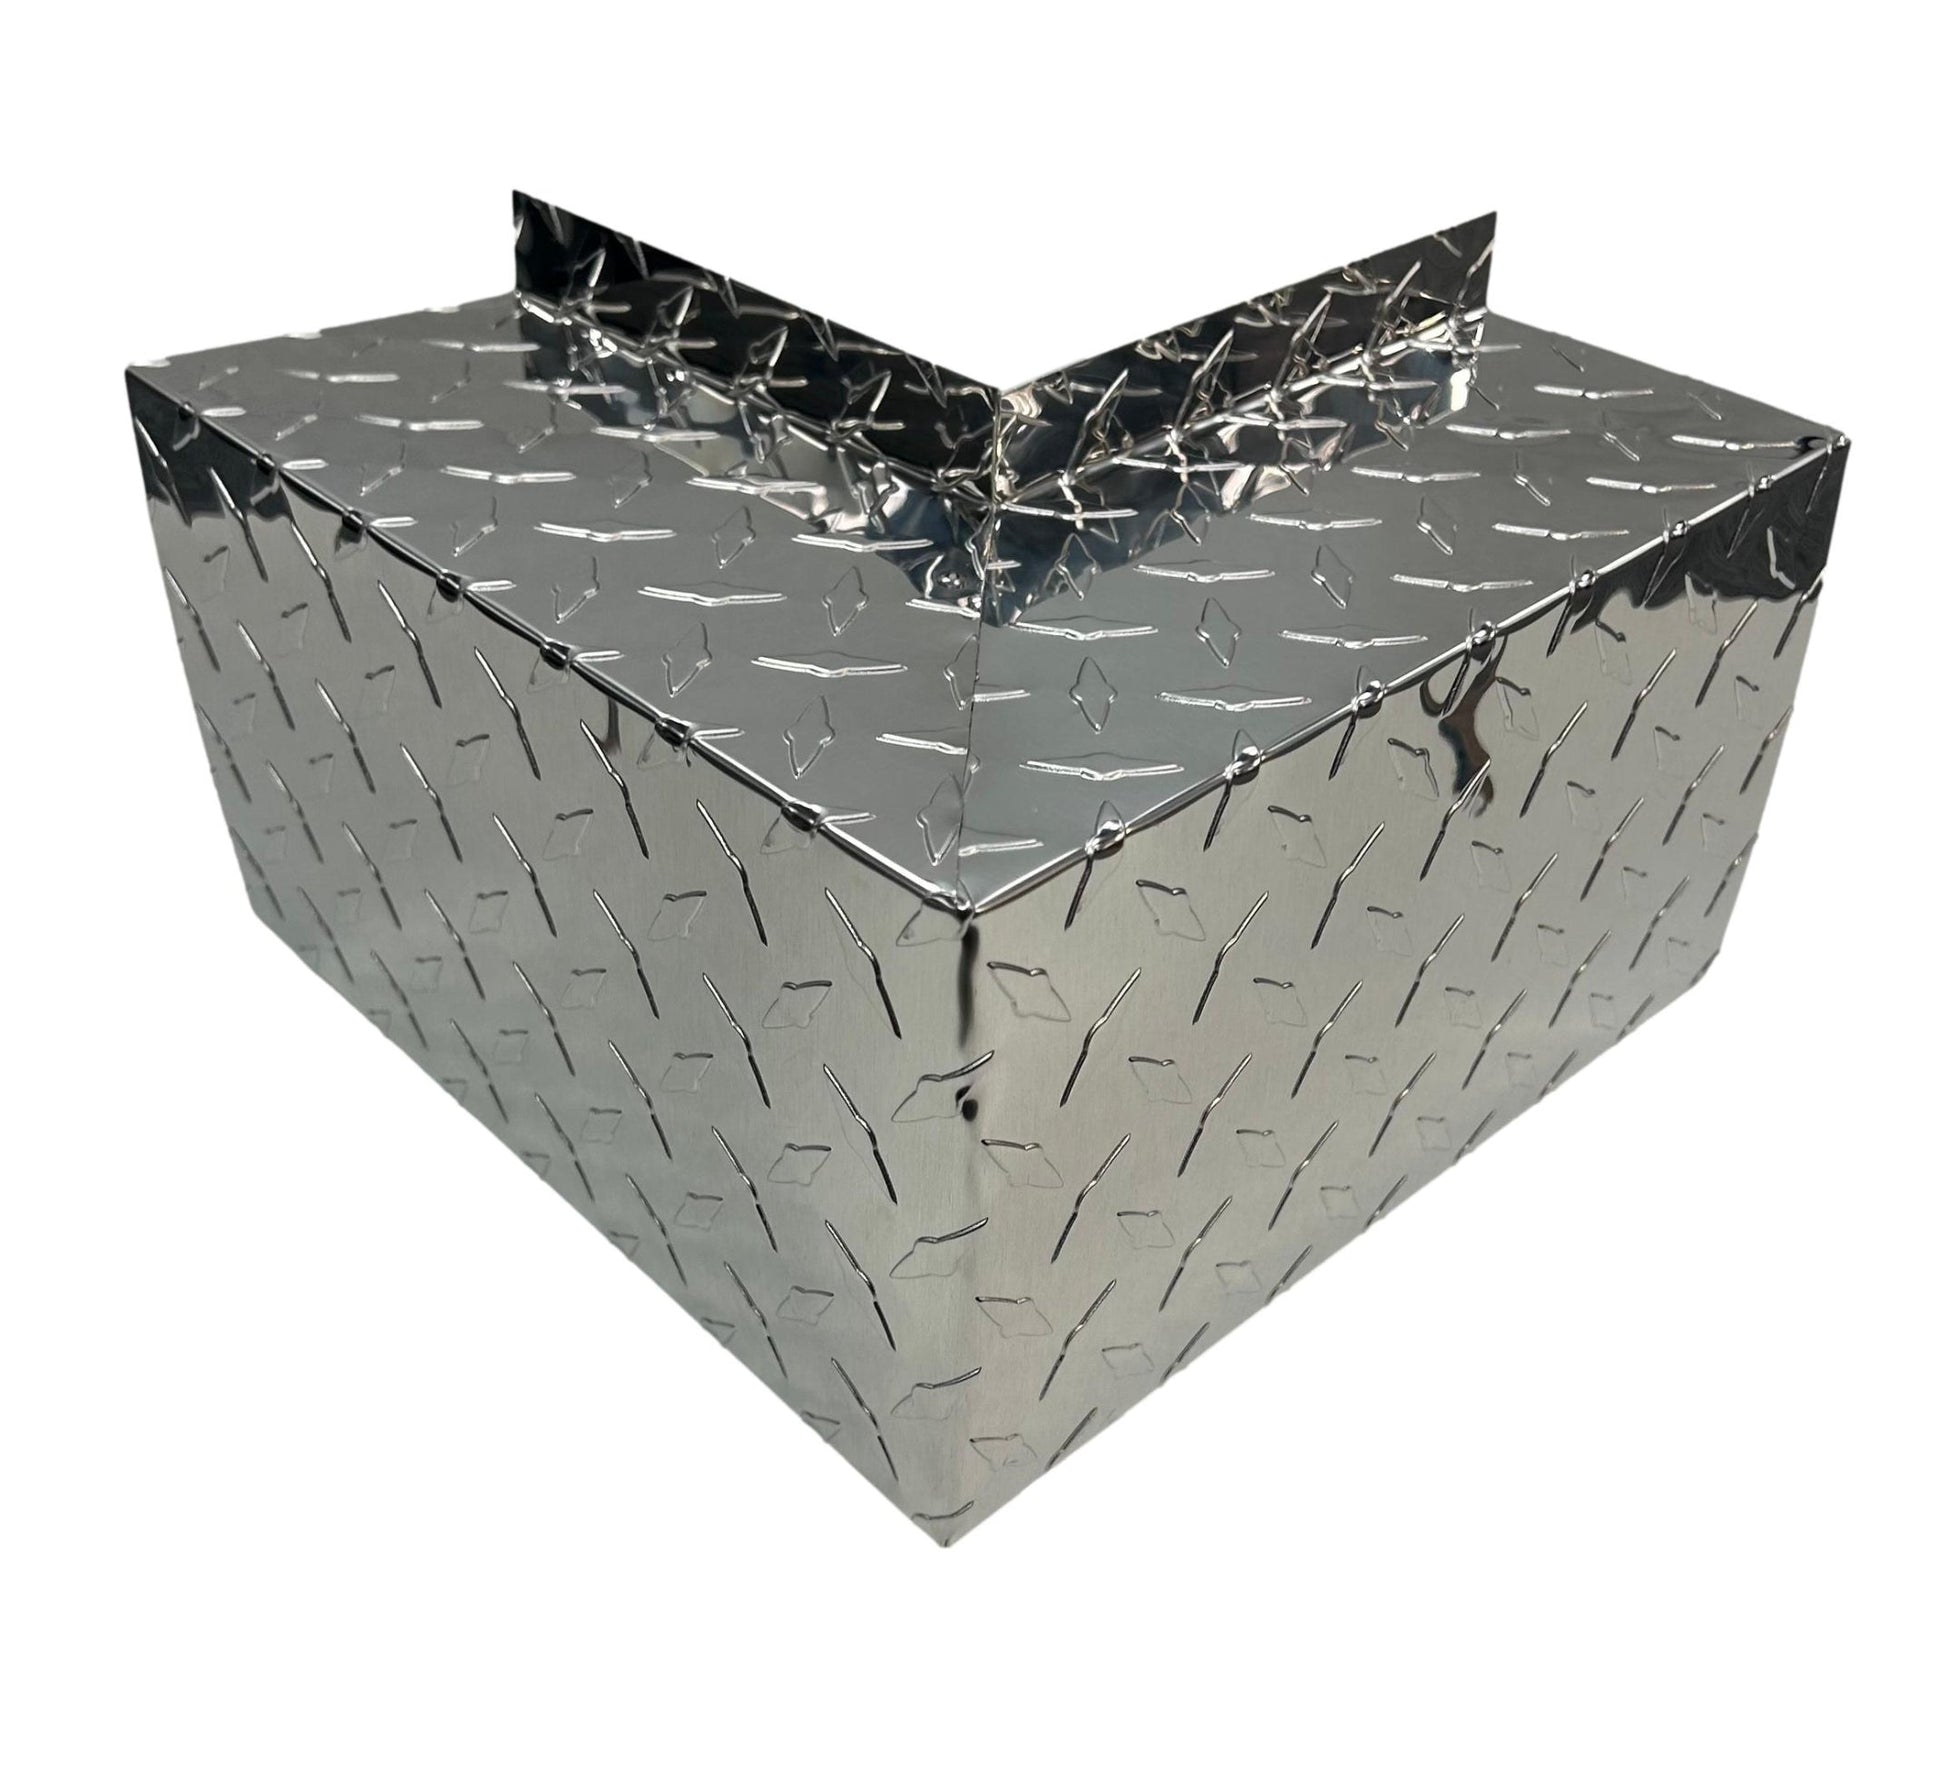 A shiny, L-shaped metal cover with a diamond plate pattern that offers Perma Cover Residential Series - Line Set Cover Outside Corner Elbows - Premium Quality. The cover has sharp edges and a reflective surface, designed likely for protective or decorative purposes. Its diamond plate texture features raised, interlocking lines for added grip and durability.